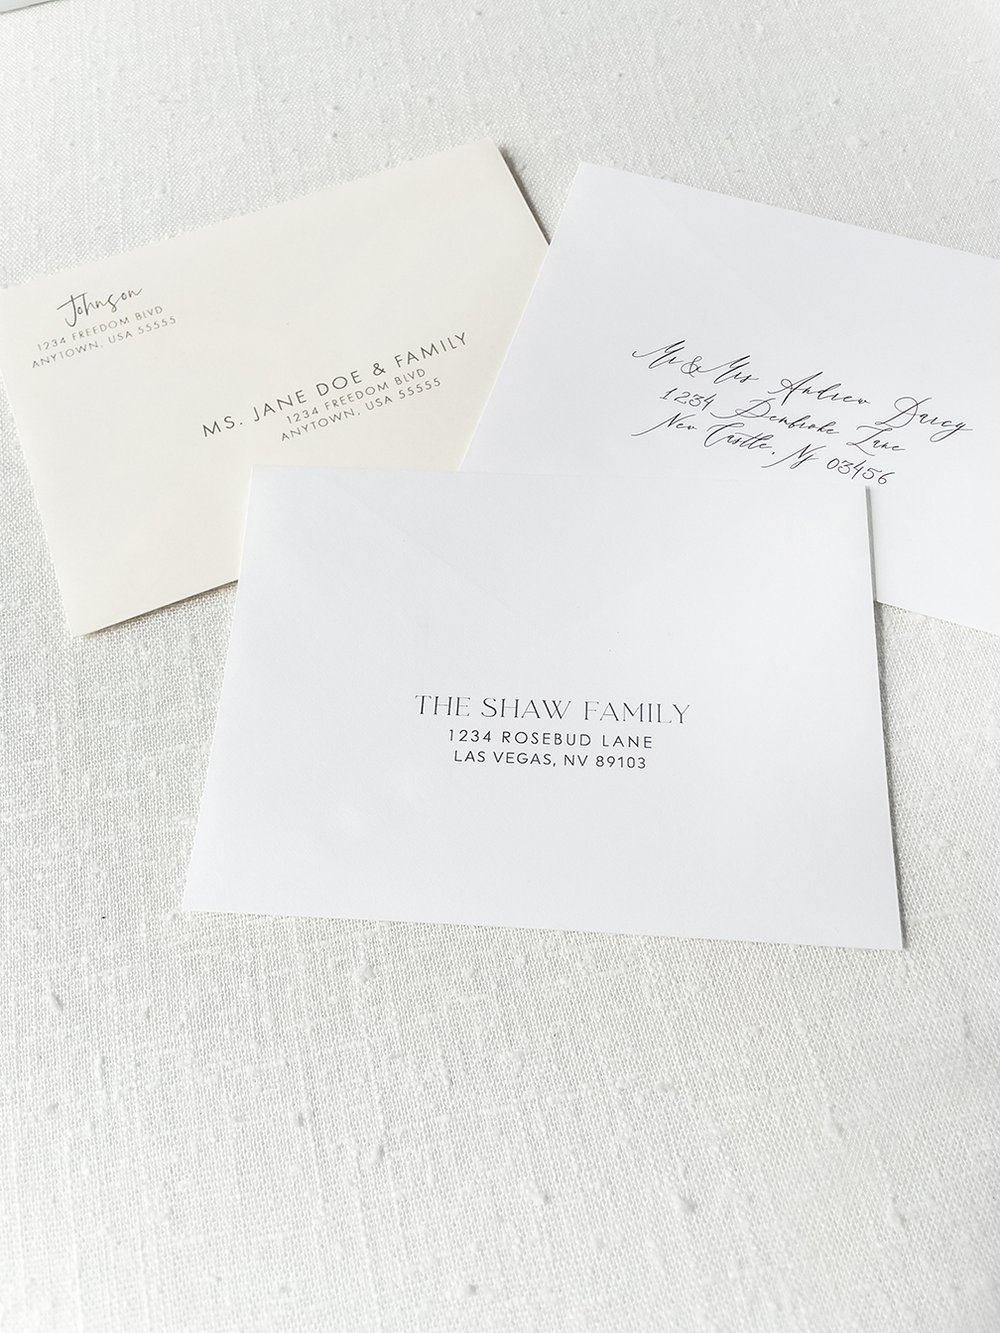 How to Address Guests on Wedding Invitation Envelopes